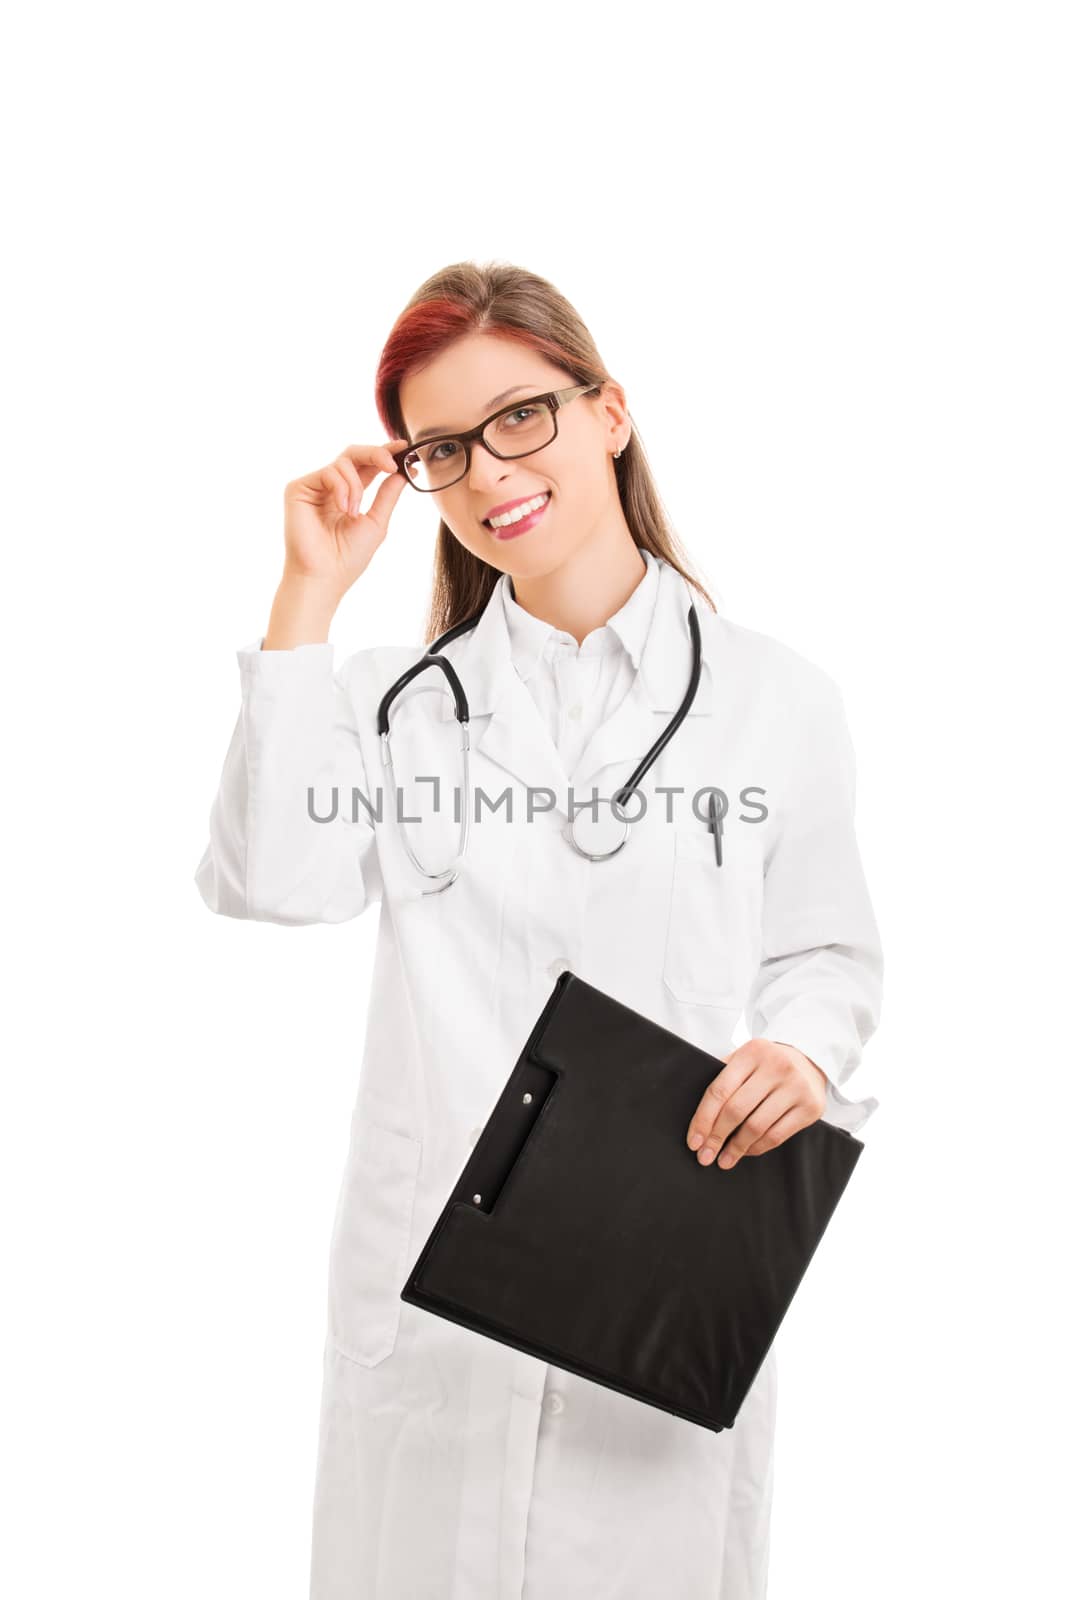 Smiling doctor holding a notepad by Mendelex